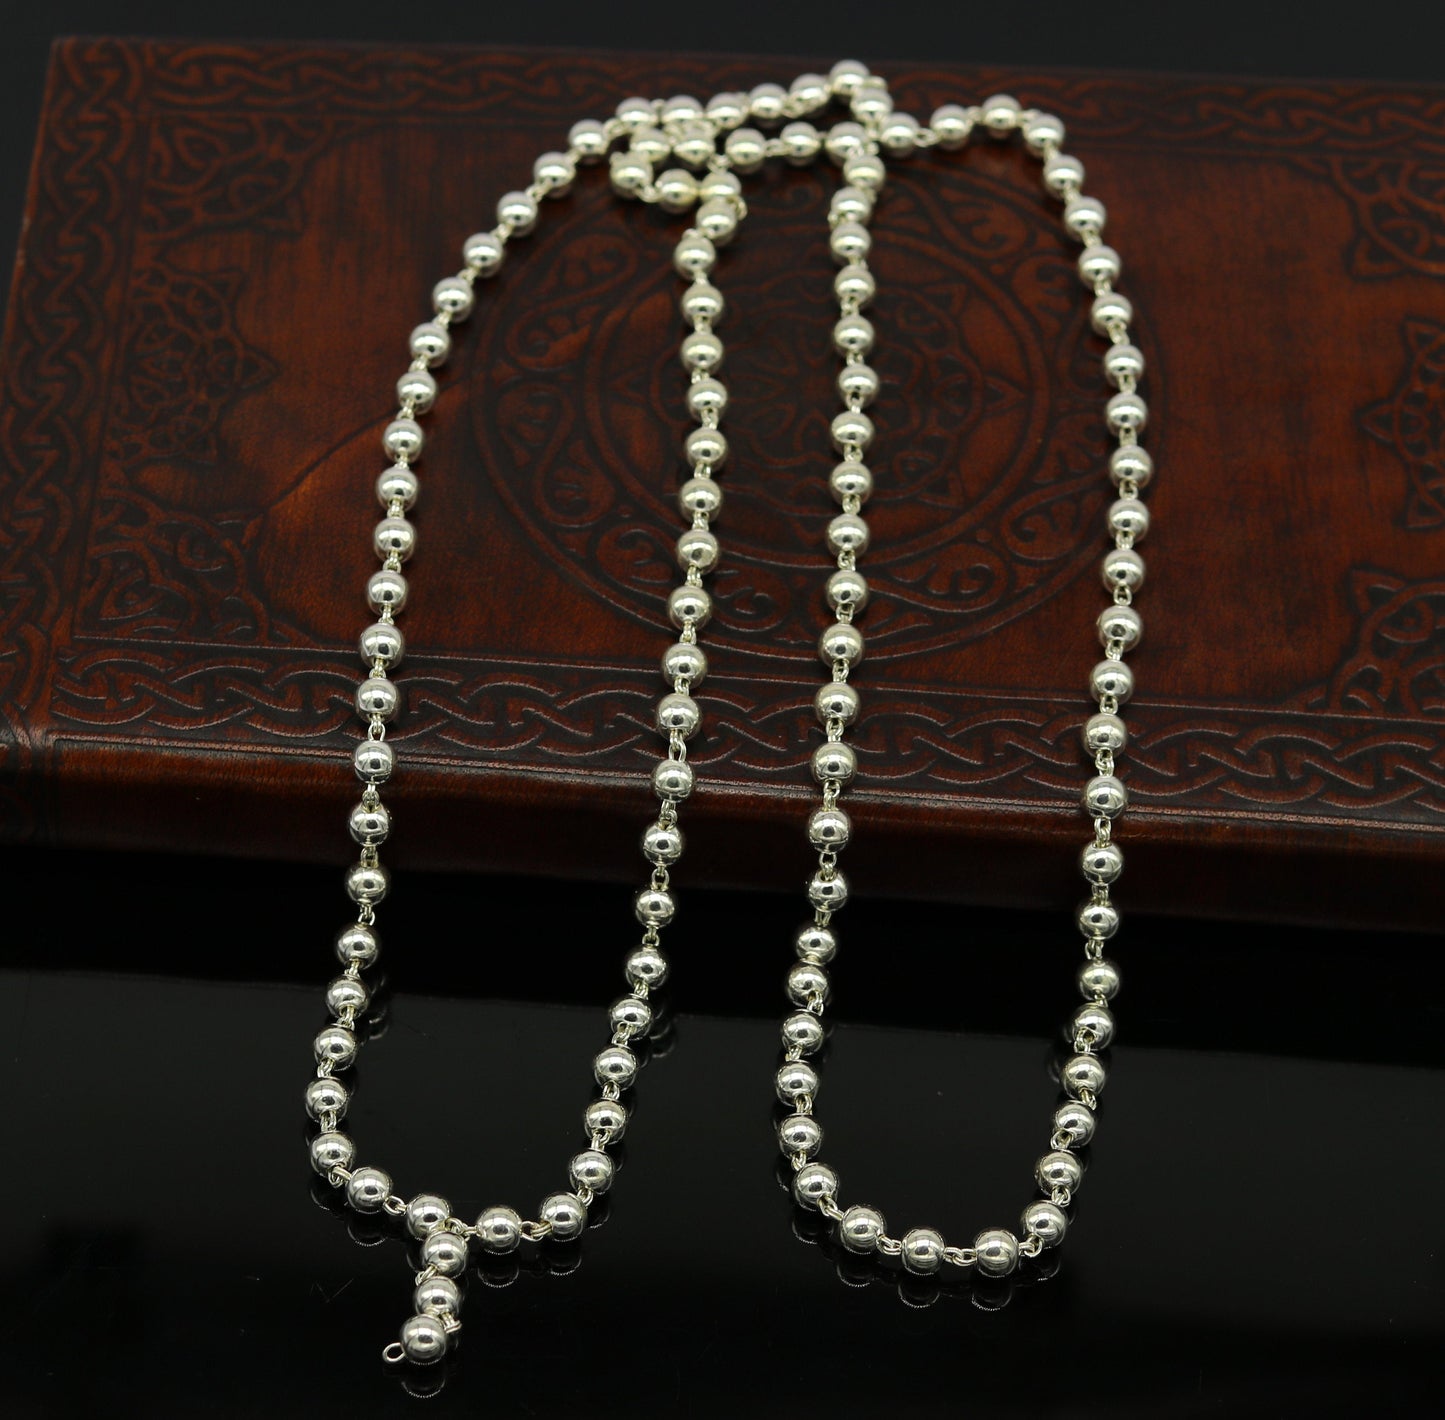 108 beads chanting japp mala solid silver beads chain necklace, fabulous 6mm beaded necklace for chanting mantra, gifting jewelry ch98 - TRIBAL ORNAMENTS